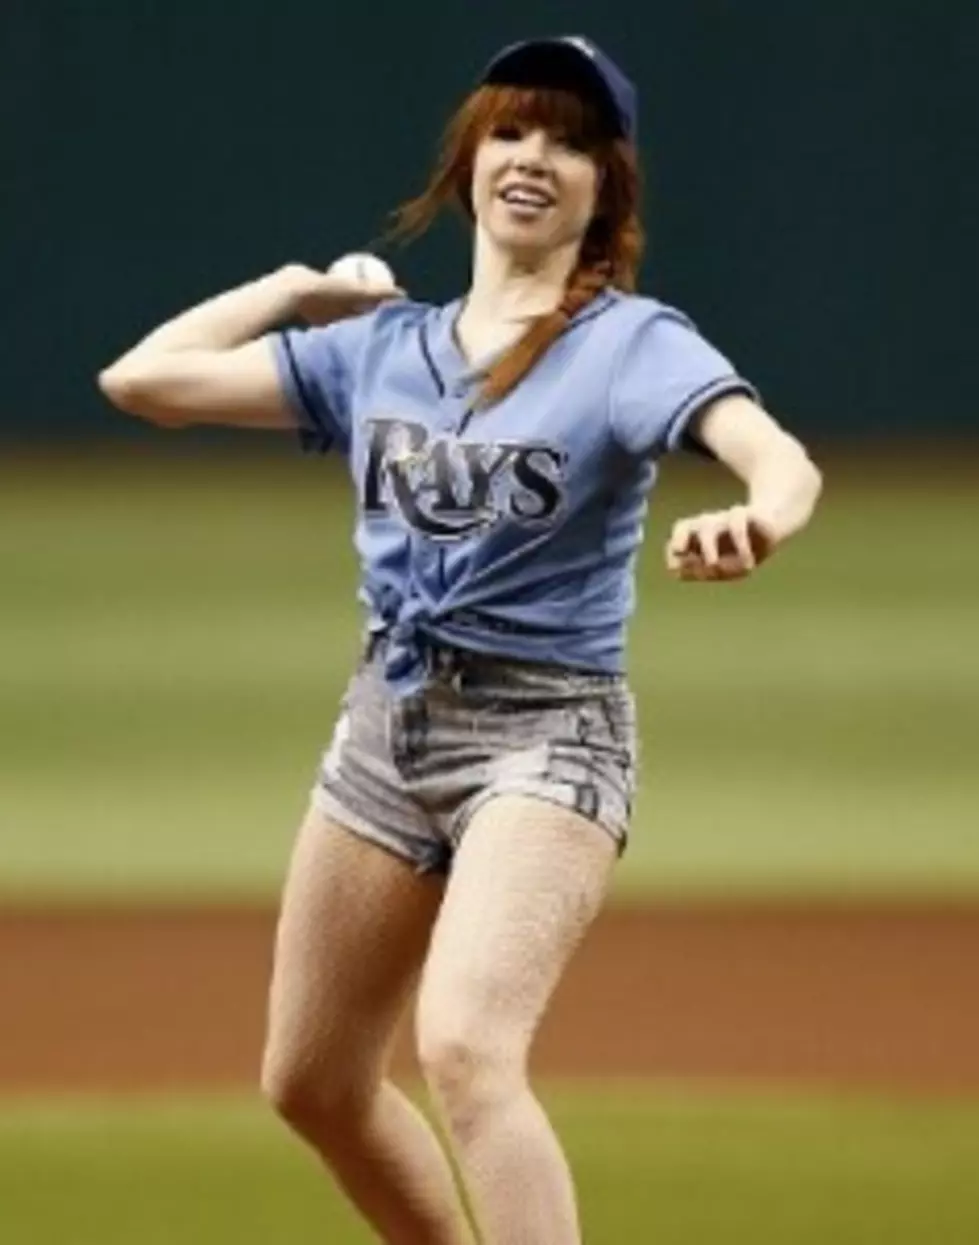 Watch Carly Rae Jepsen Throw the Worst First Pitch Ever [VIDEO]